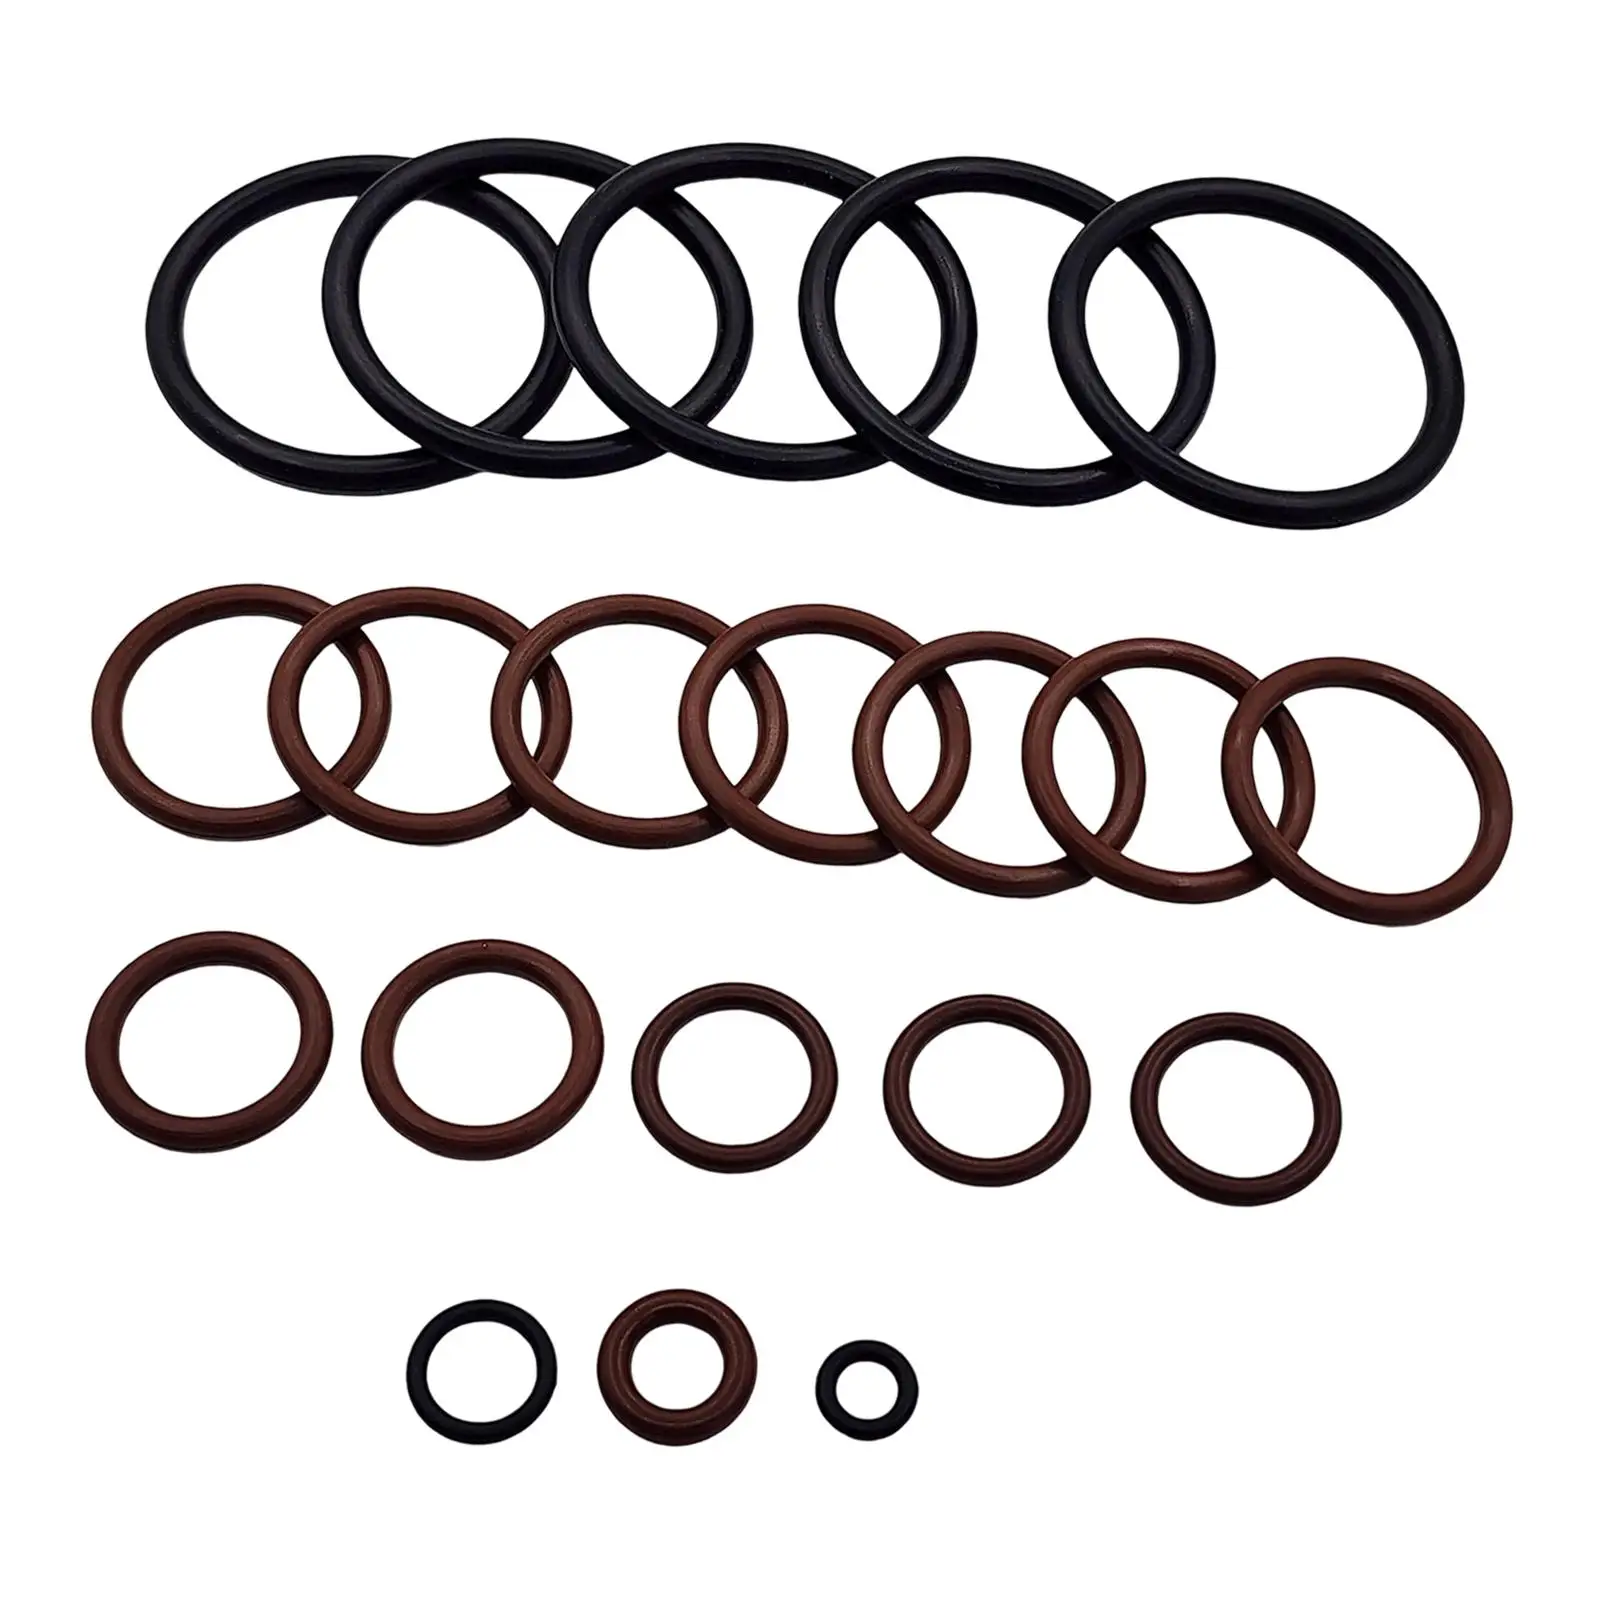 Cooling  Replacement Seals s Easy to or Gas Sealing Connections Professional for E46 M52 M54 Hose